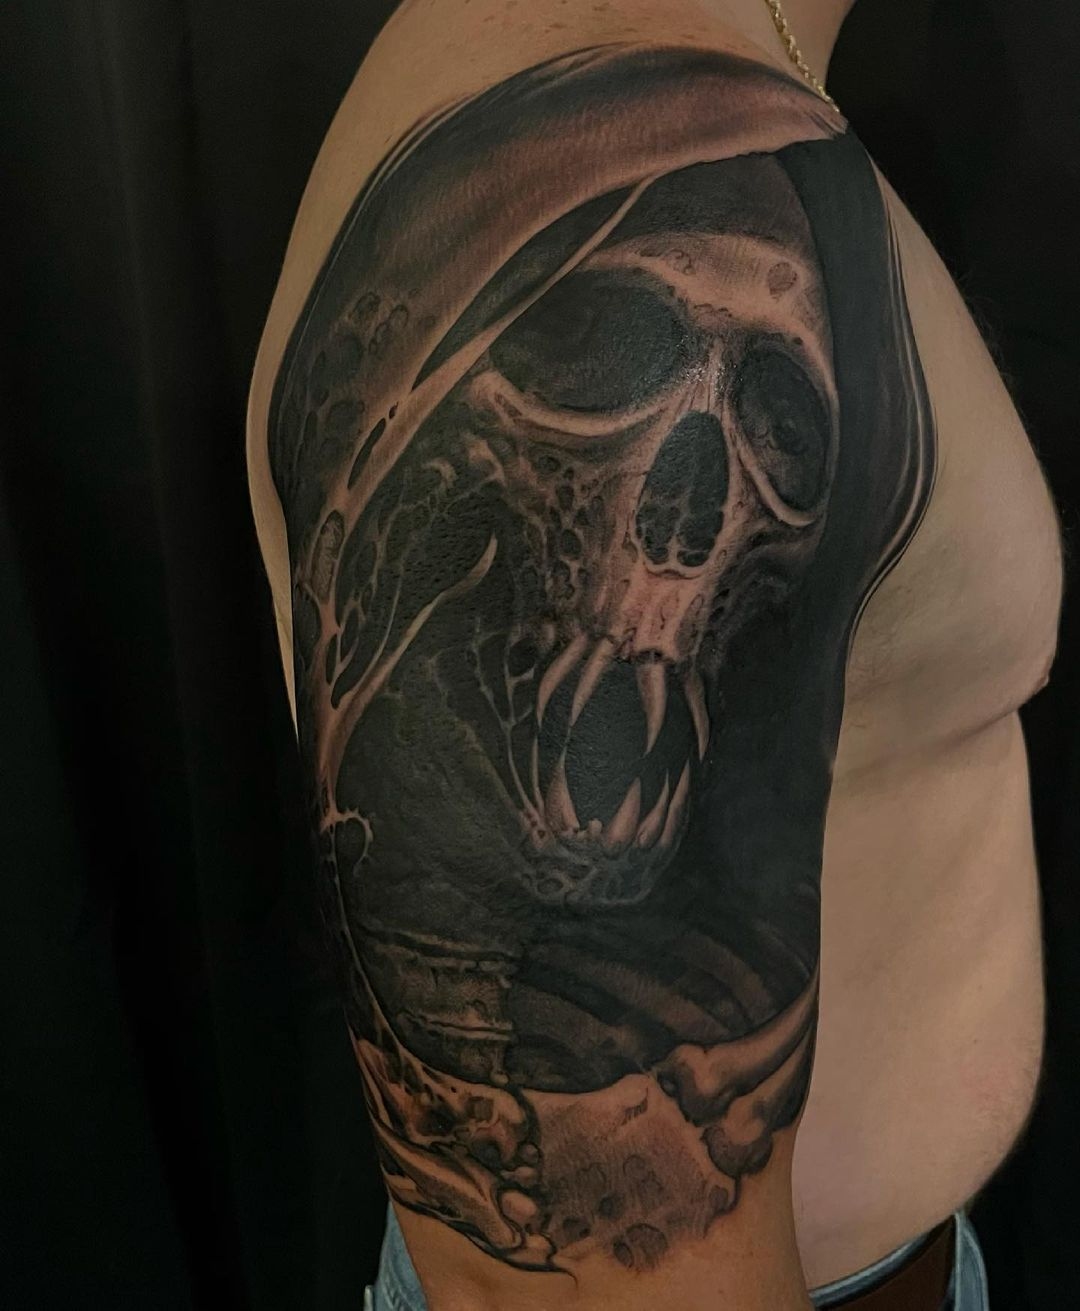 Skull head with fangs in cowl - fine line black and grey upper arm and shoulder tattoo by tattoo artist Shaine Smith.